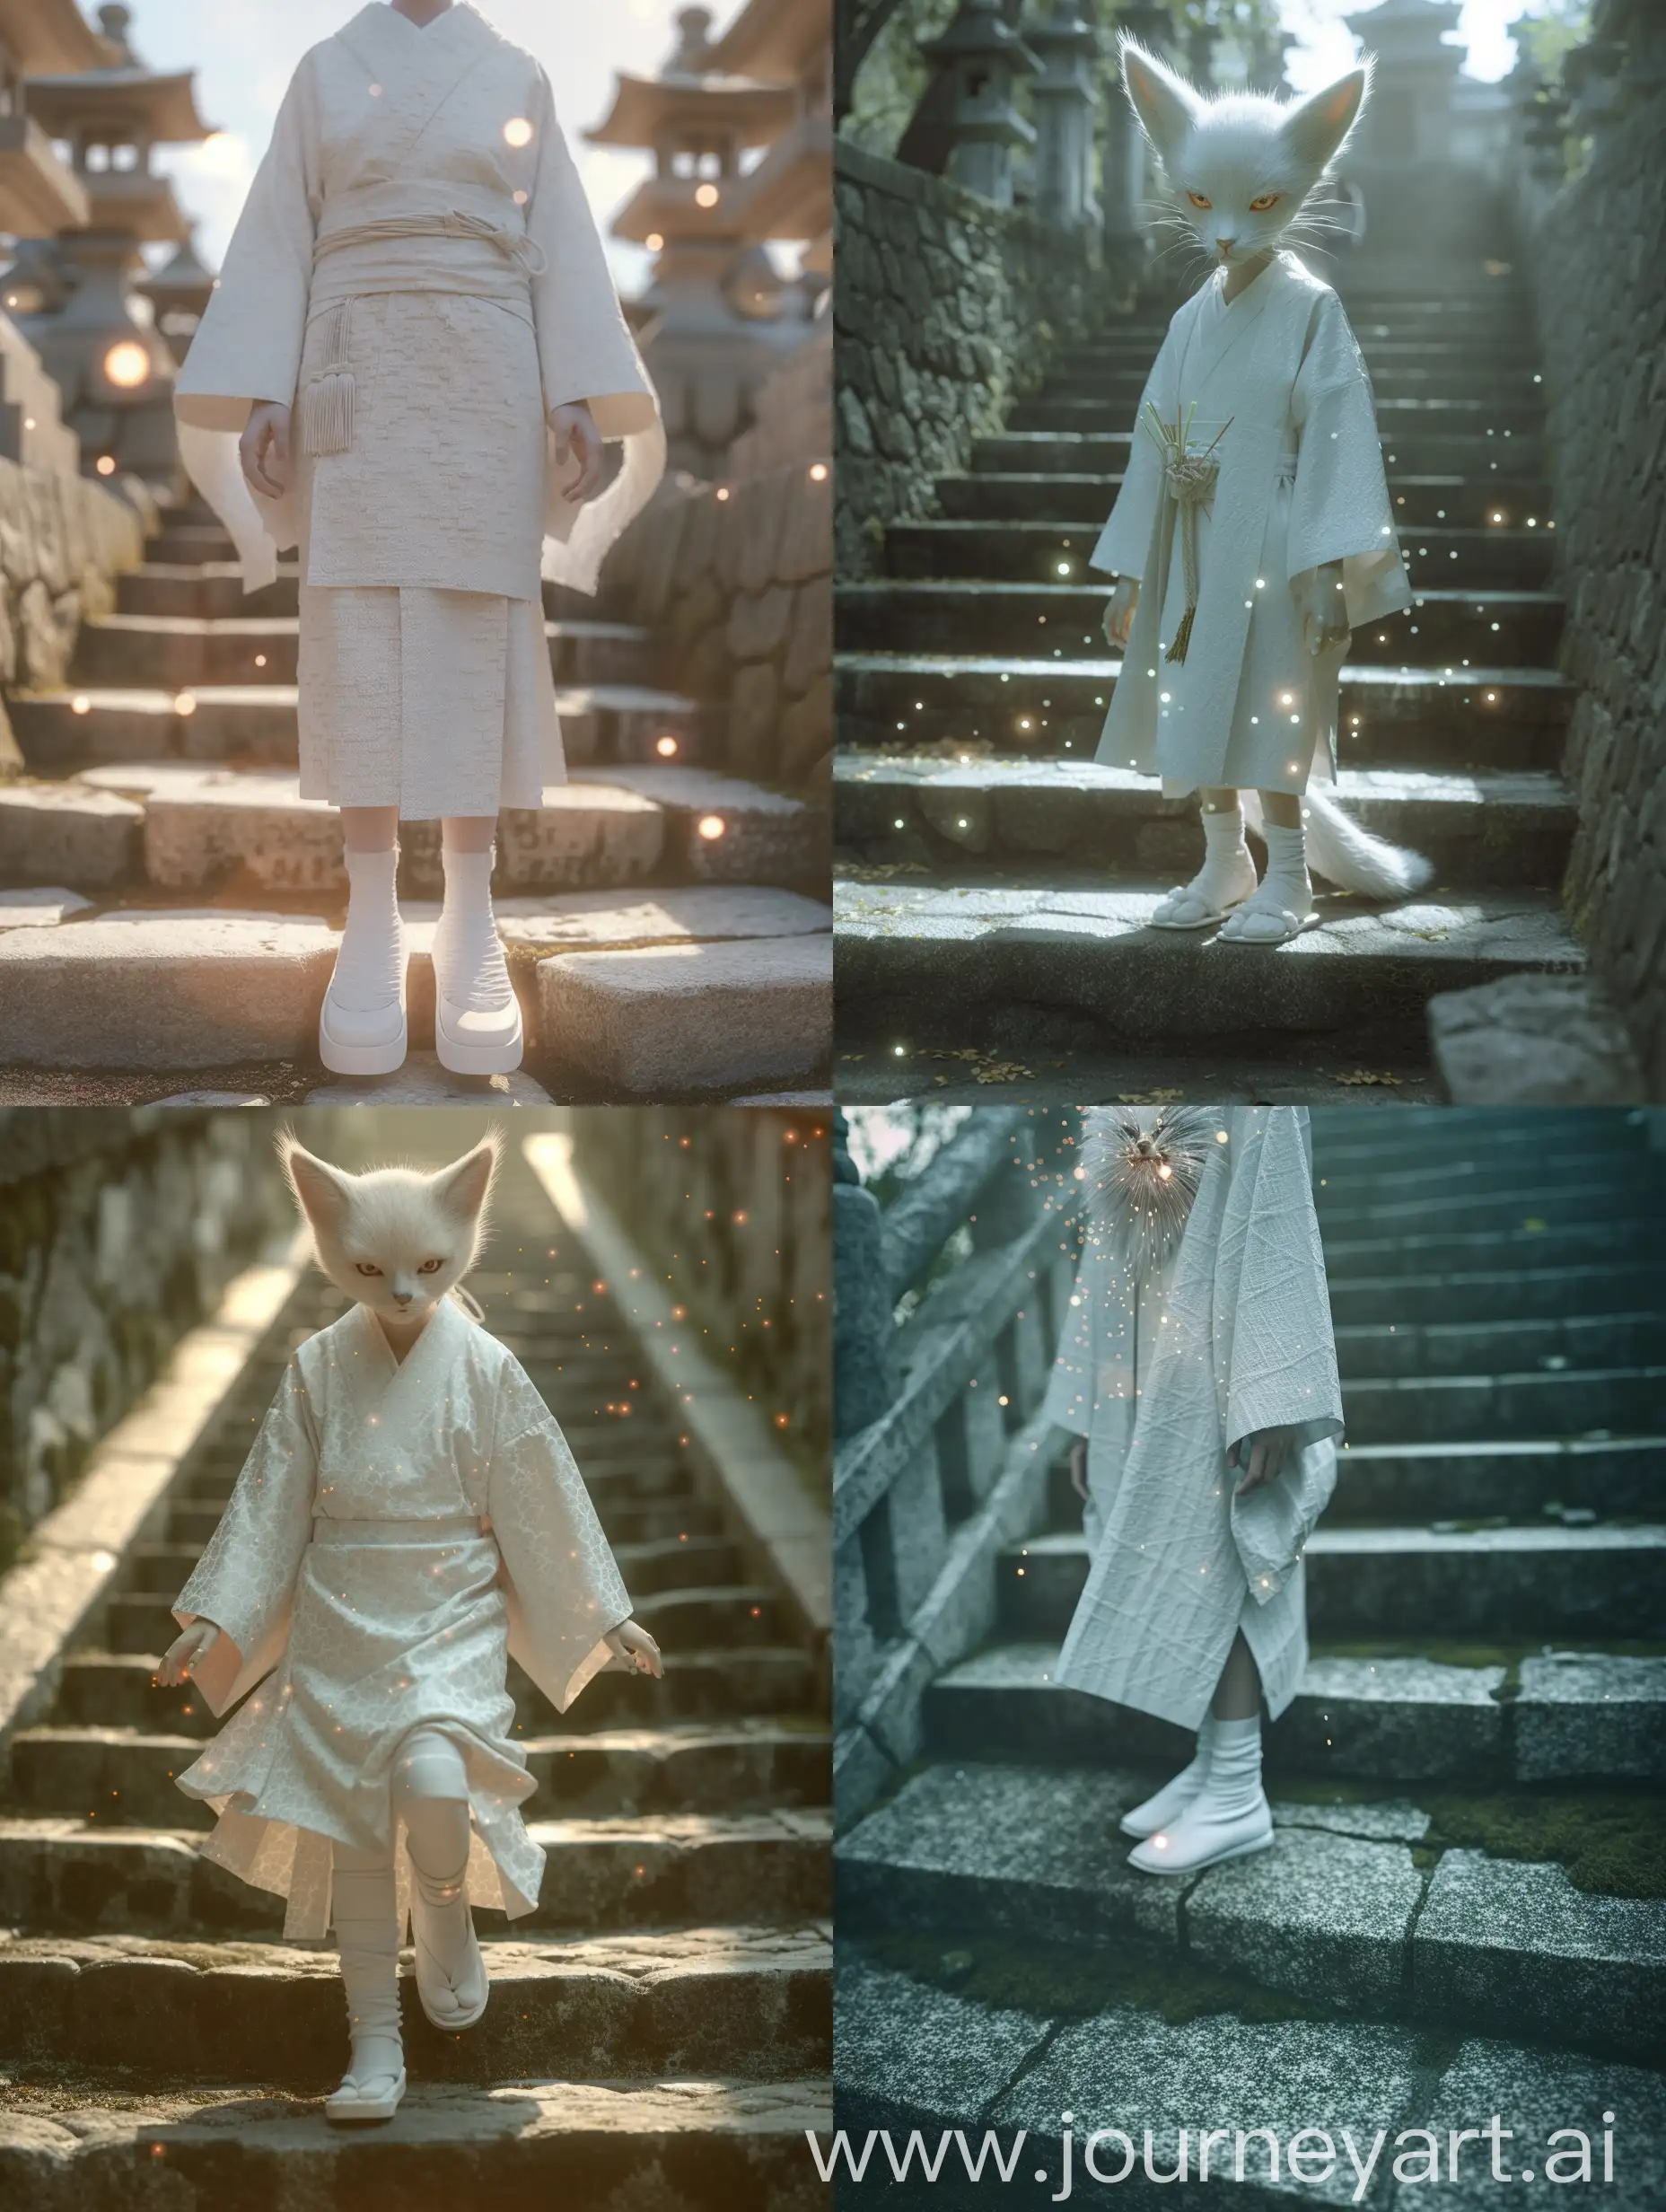 cinematic, realism, Using (((imagination))) to craft a photorealistic representation of an unusual fantasy dream, use wide-angle lens, long-shot, full-shot, Cinematic shooting techniques and shooting angles. Depiction of a yokai ((( Fox spirit))), wearing a white kimono,
cinematic, realism, Using (((imagination))) to craft a photorealistic representation of an unusual fantasy dream, Cinematic shooting techniques and shooting angles, use low-angle lens, long-shot, full-shot. Depiction of a yokai ((( Chōchin-oiwa))), wearing a white kimono, white shoes, Abandoned ancient Stone staircase leading to temple in Tokyo, Amazing, shocking, Mysterious, Contrasty, tiles, ivory colors, Memphis, magic sparkles lighting, skillfully captured through an EE 70mm lens, providing a professional movie feel. The UHD camera captures every detail of this moment, highlighting the colors and textures. Render her in a photorealistic style, cinematic, capturing the fine details of her features and surroundings. Pay close attention to realistic skin tones, textures, and lighting conditions. Ensure the image is in high resolution, such as 8K, to showcase the intricate details and allo